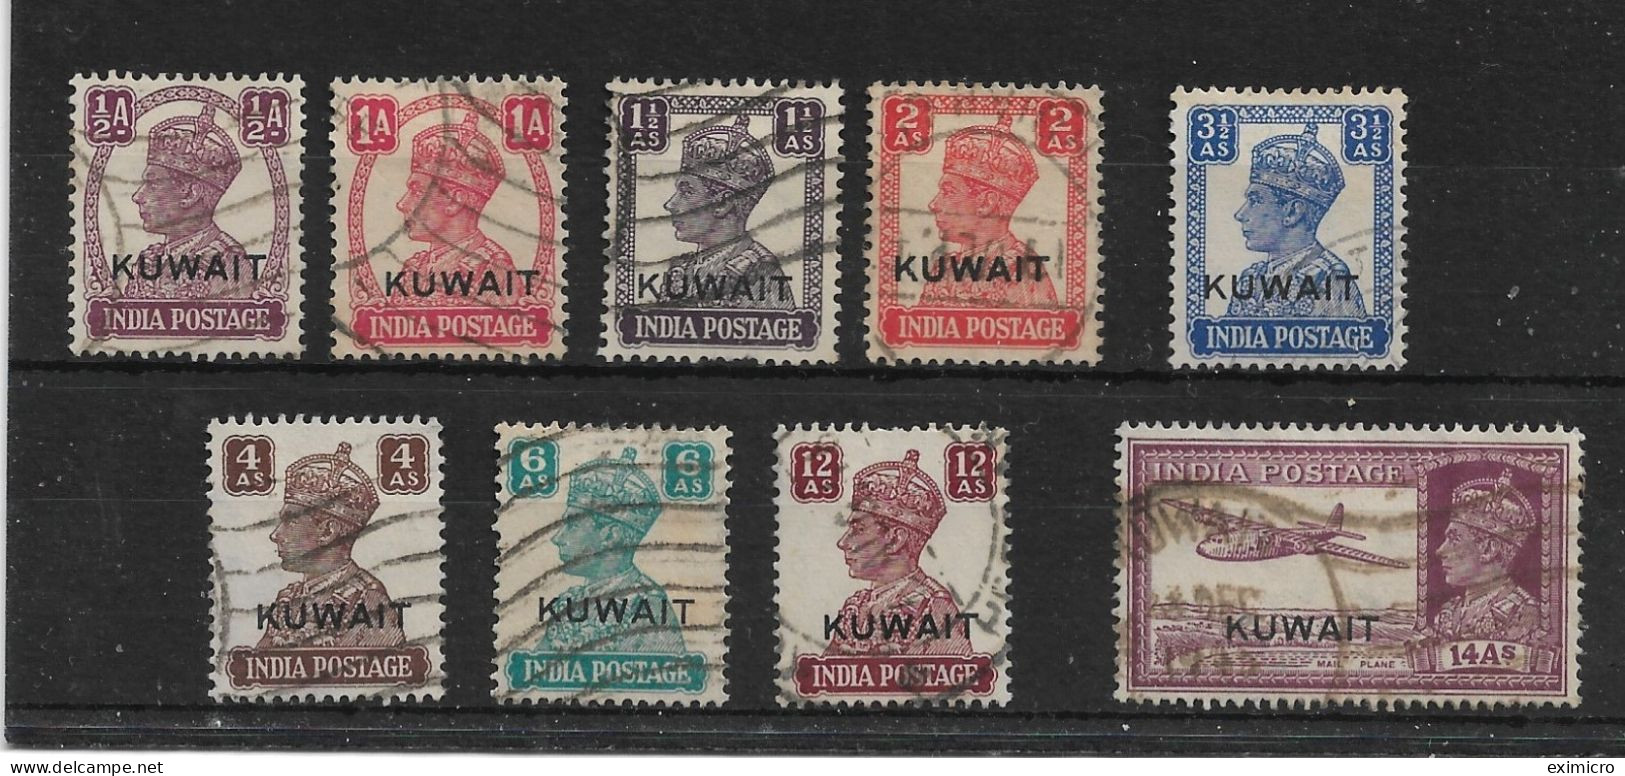 KUWAIT 1945 VALUES TO 14a SG 55,57,59,60,60a,62,63 FINE USED Cat £140+ - Kuwait